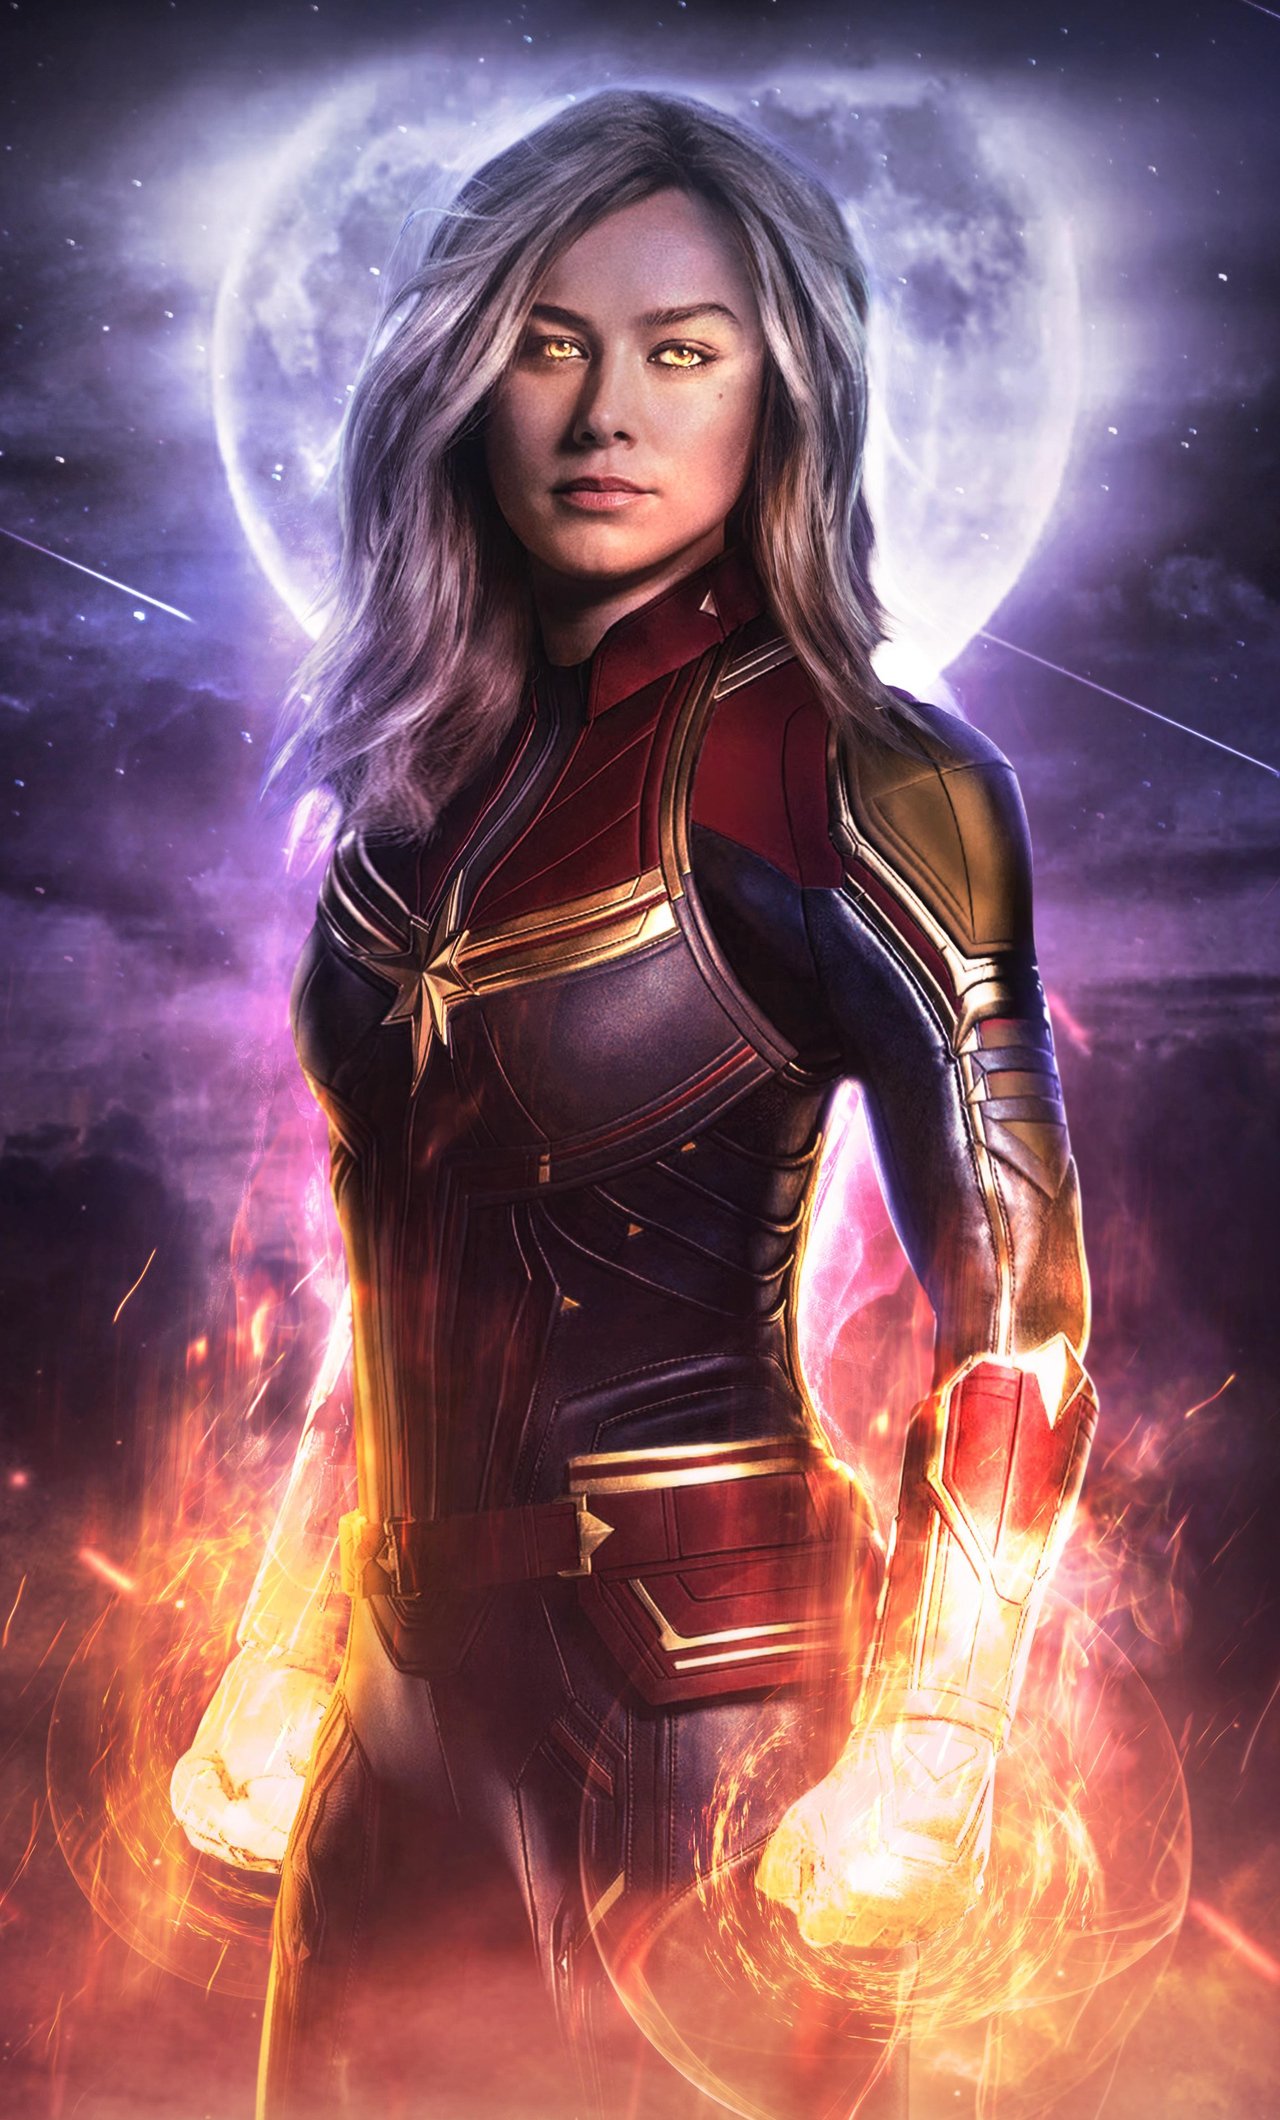 Iphone Captain Marvel Wallpapers Wallpaper Cave